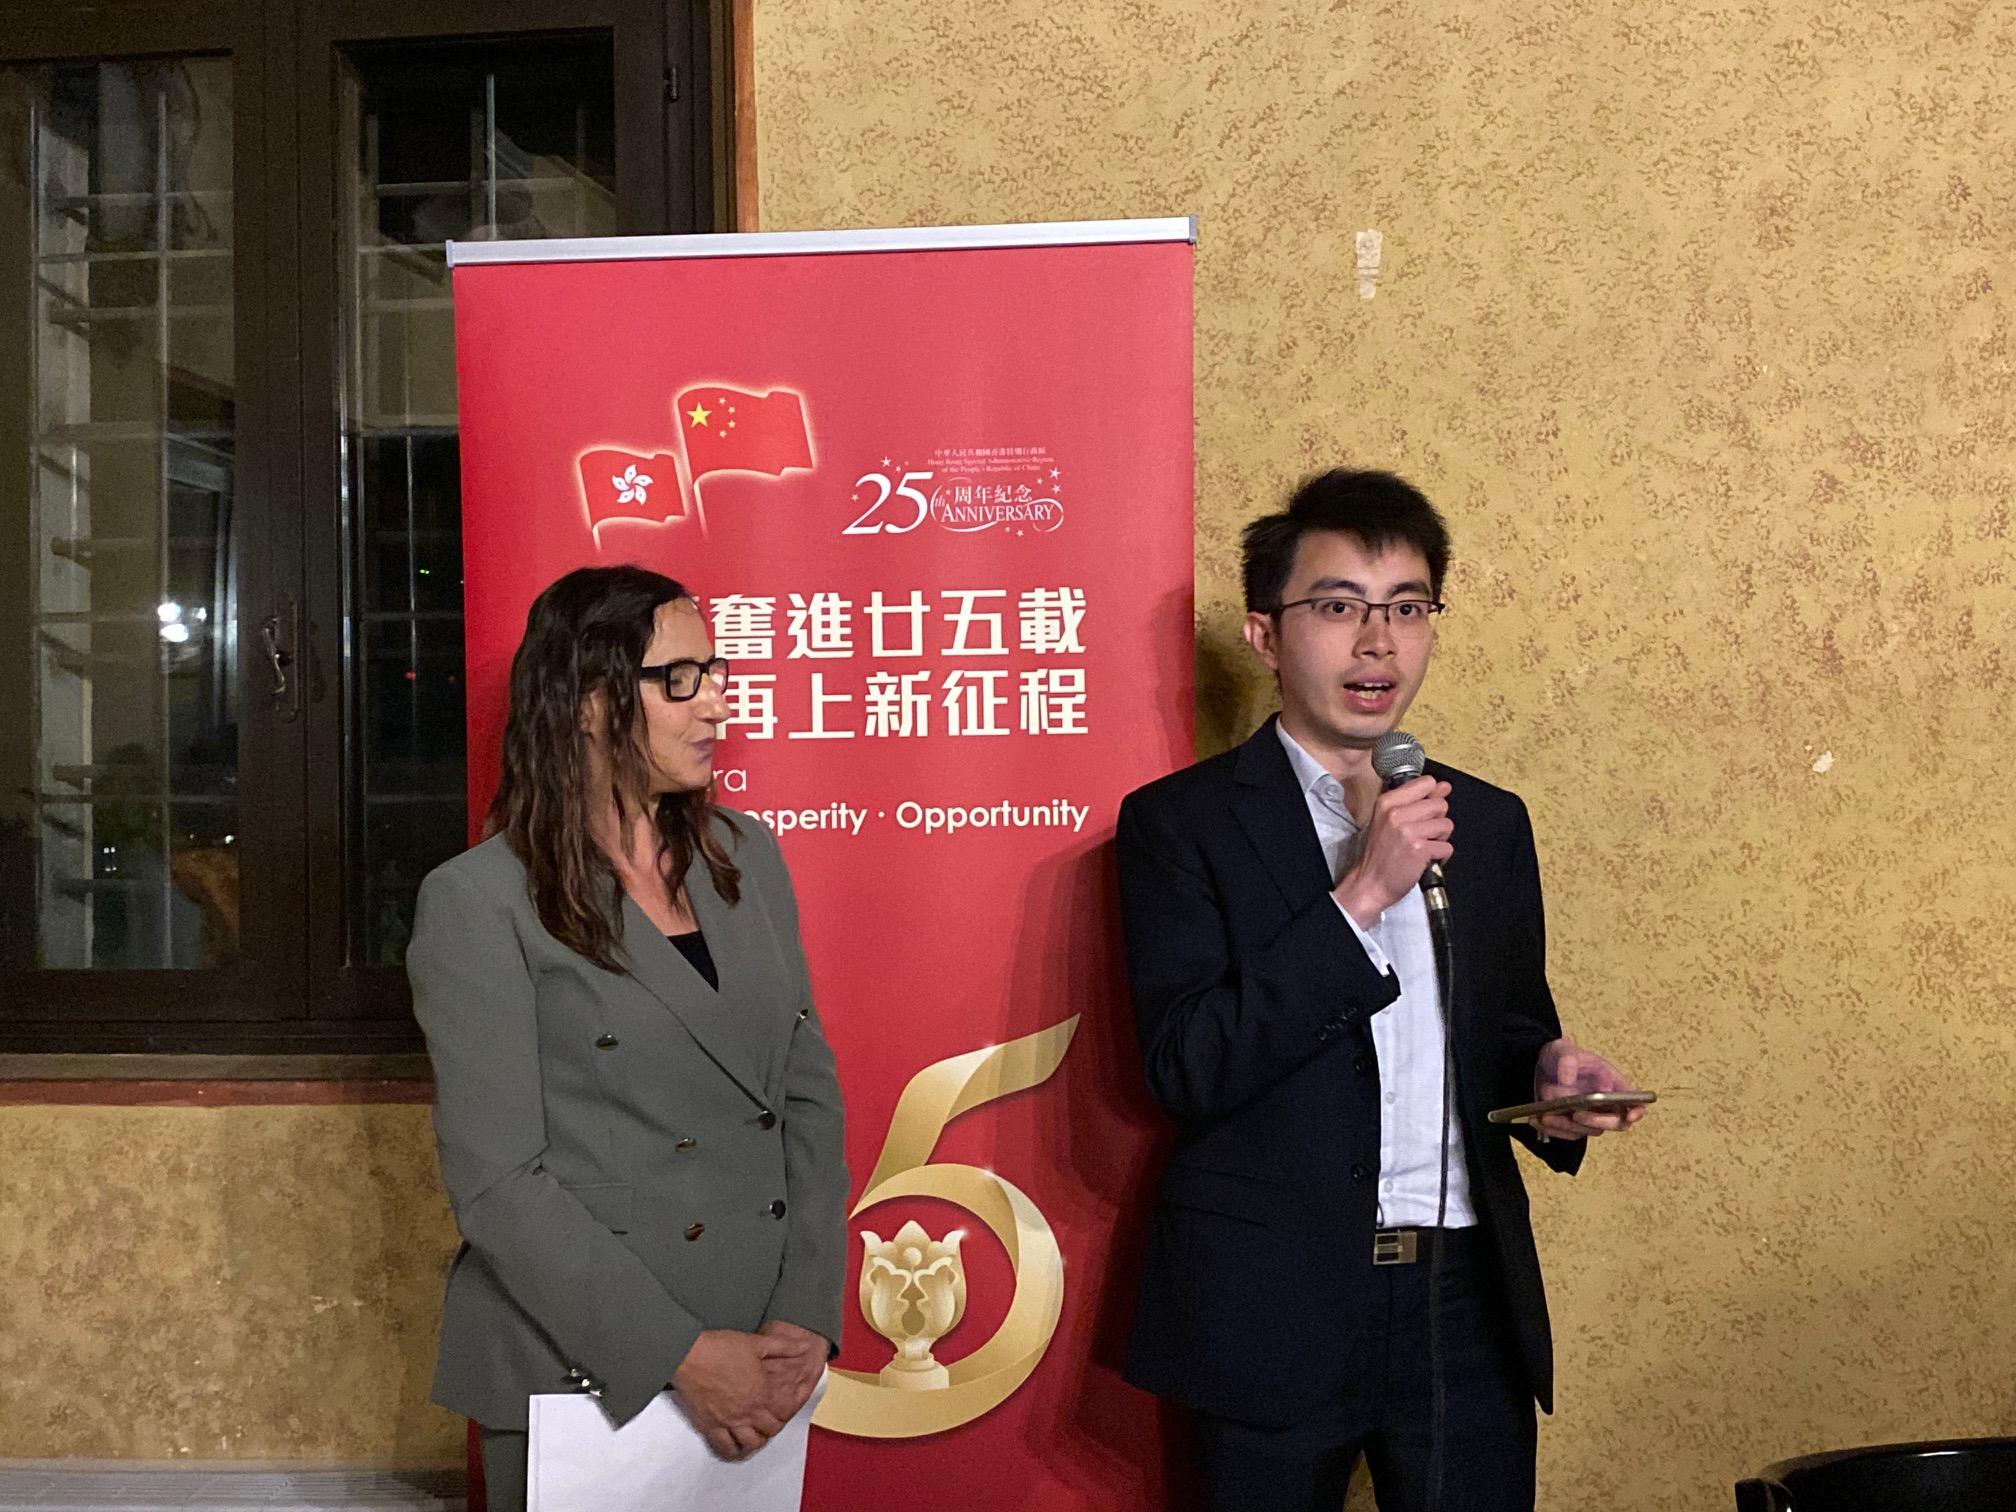 Deputy Representative of the Hong Kong Economic and Trade Office in Brussels, Mr Henry Tsoi (right), addressed guests from the international cinema and cultural scene at the networking reception of the Hong Kong Film Night held in Udine, Italy on April 23 (Udine time) during the 24th Far East Film Festival (FEFF).  FEFF President Sabrina Baracetti (left) was also present.
